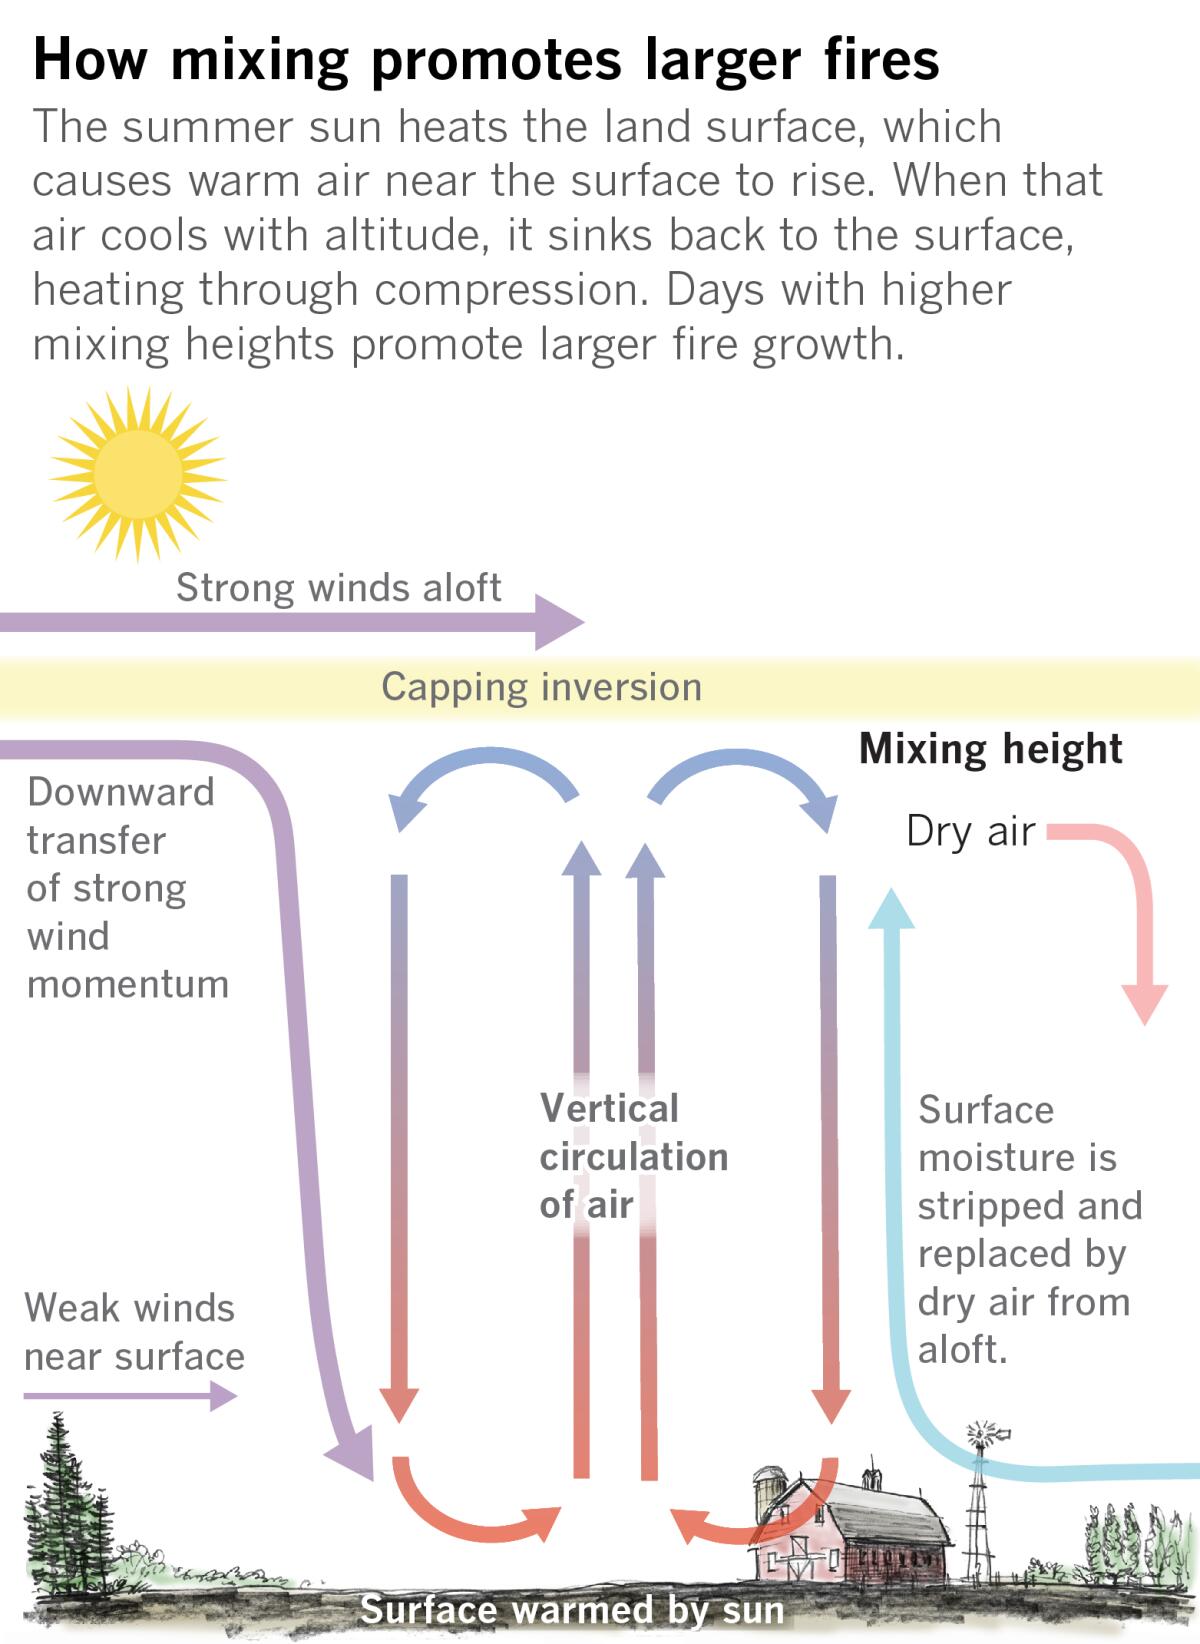 Explainer of how high mixing height promotes larger fires.